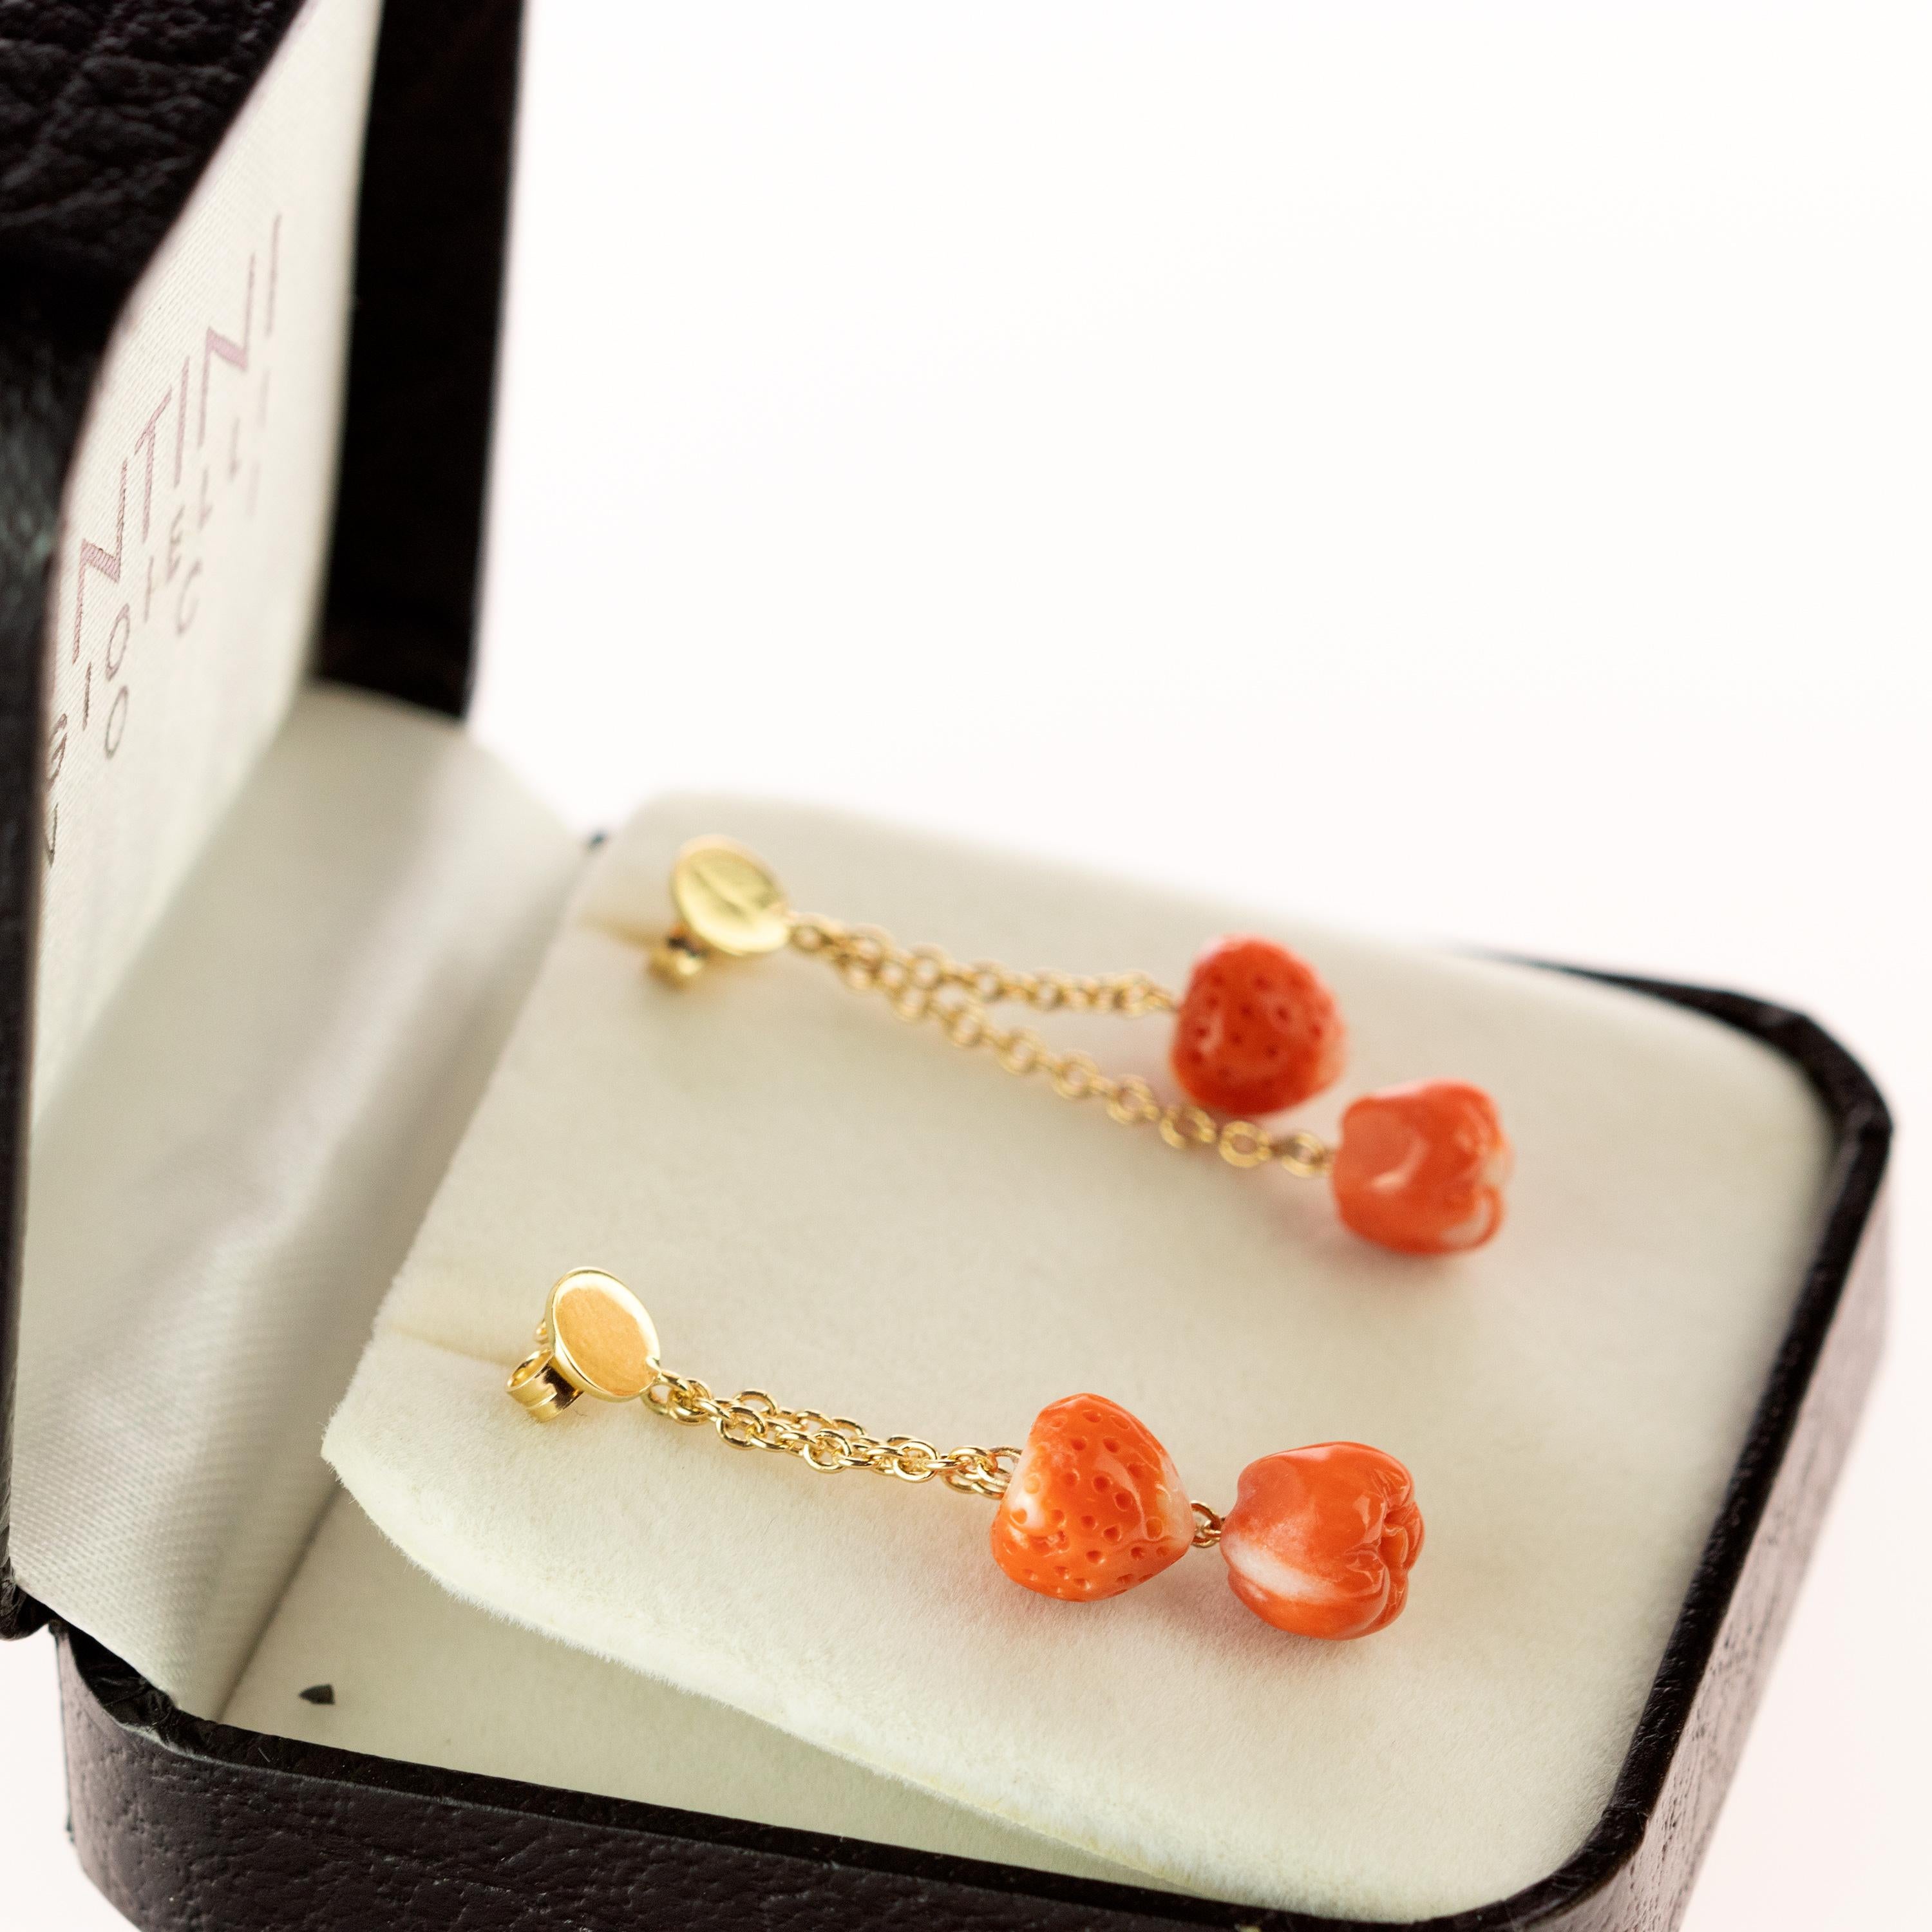 Astonishing and sweet mediterranean strawberry apple coral earrings. Natural coral carved gems holded by two 18 karat yellow gold chains that evoke the italian handmade traditional jewelry work. Dangle and drop earrings with a subtle movement for a